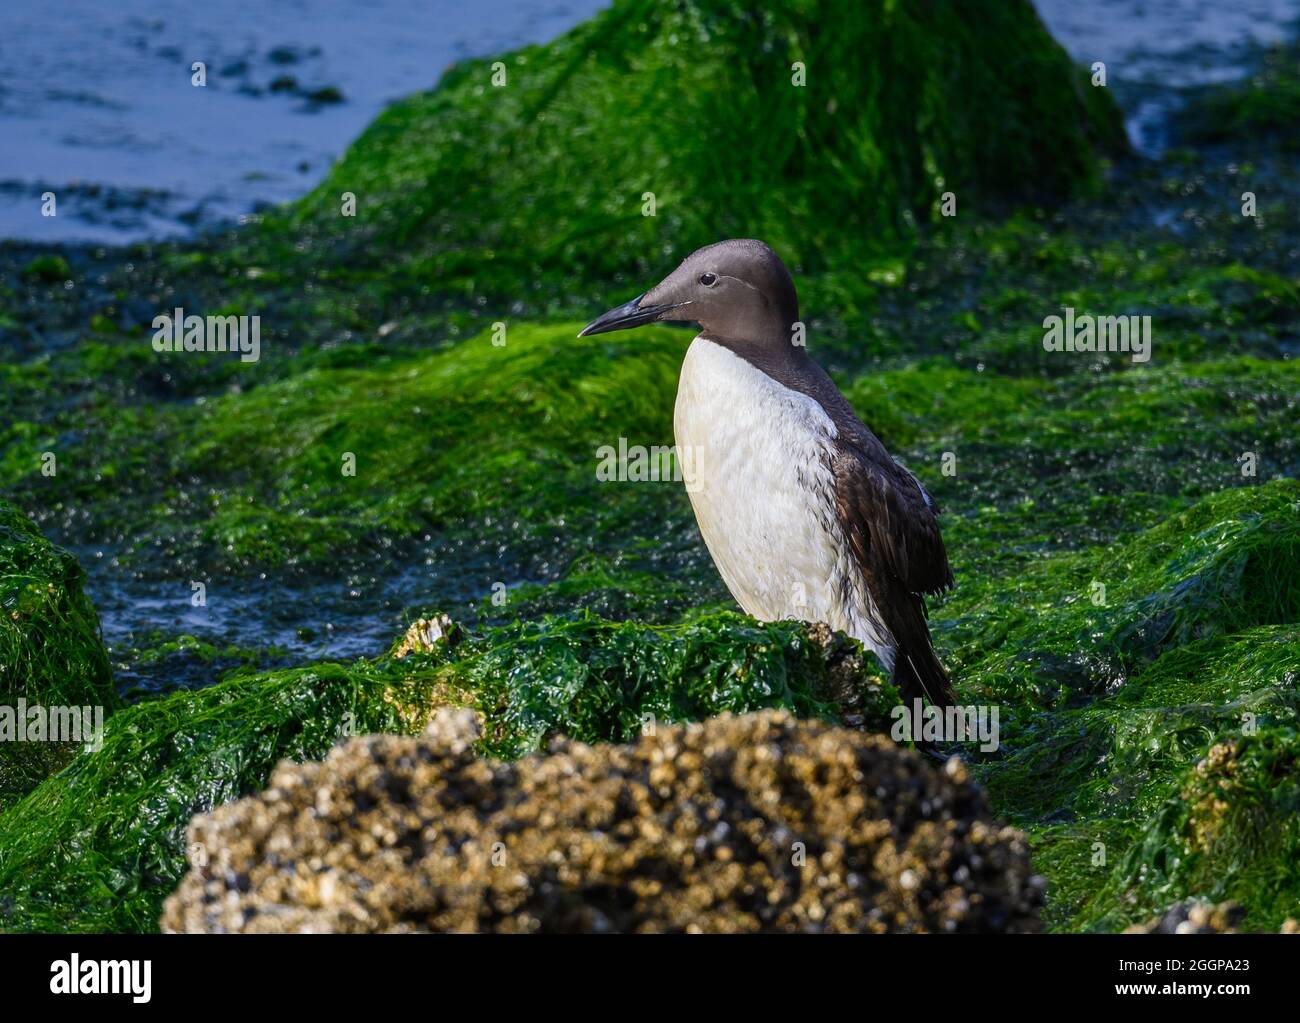 A Common Murre (Uria aalge) stranded in a shallow tidal pool. Florence, Oregon, USA. Stock Photo